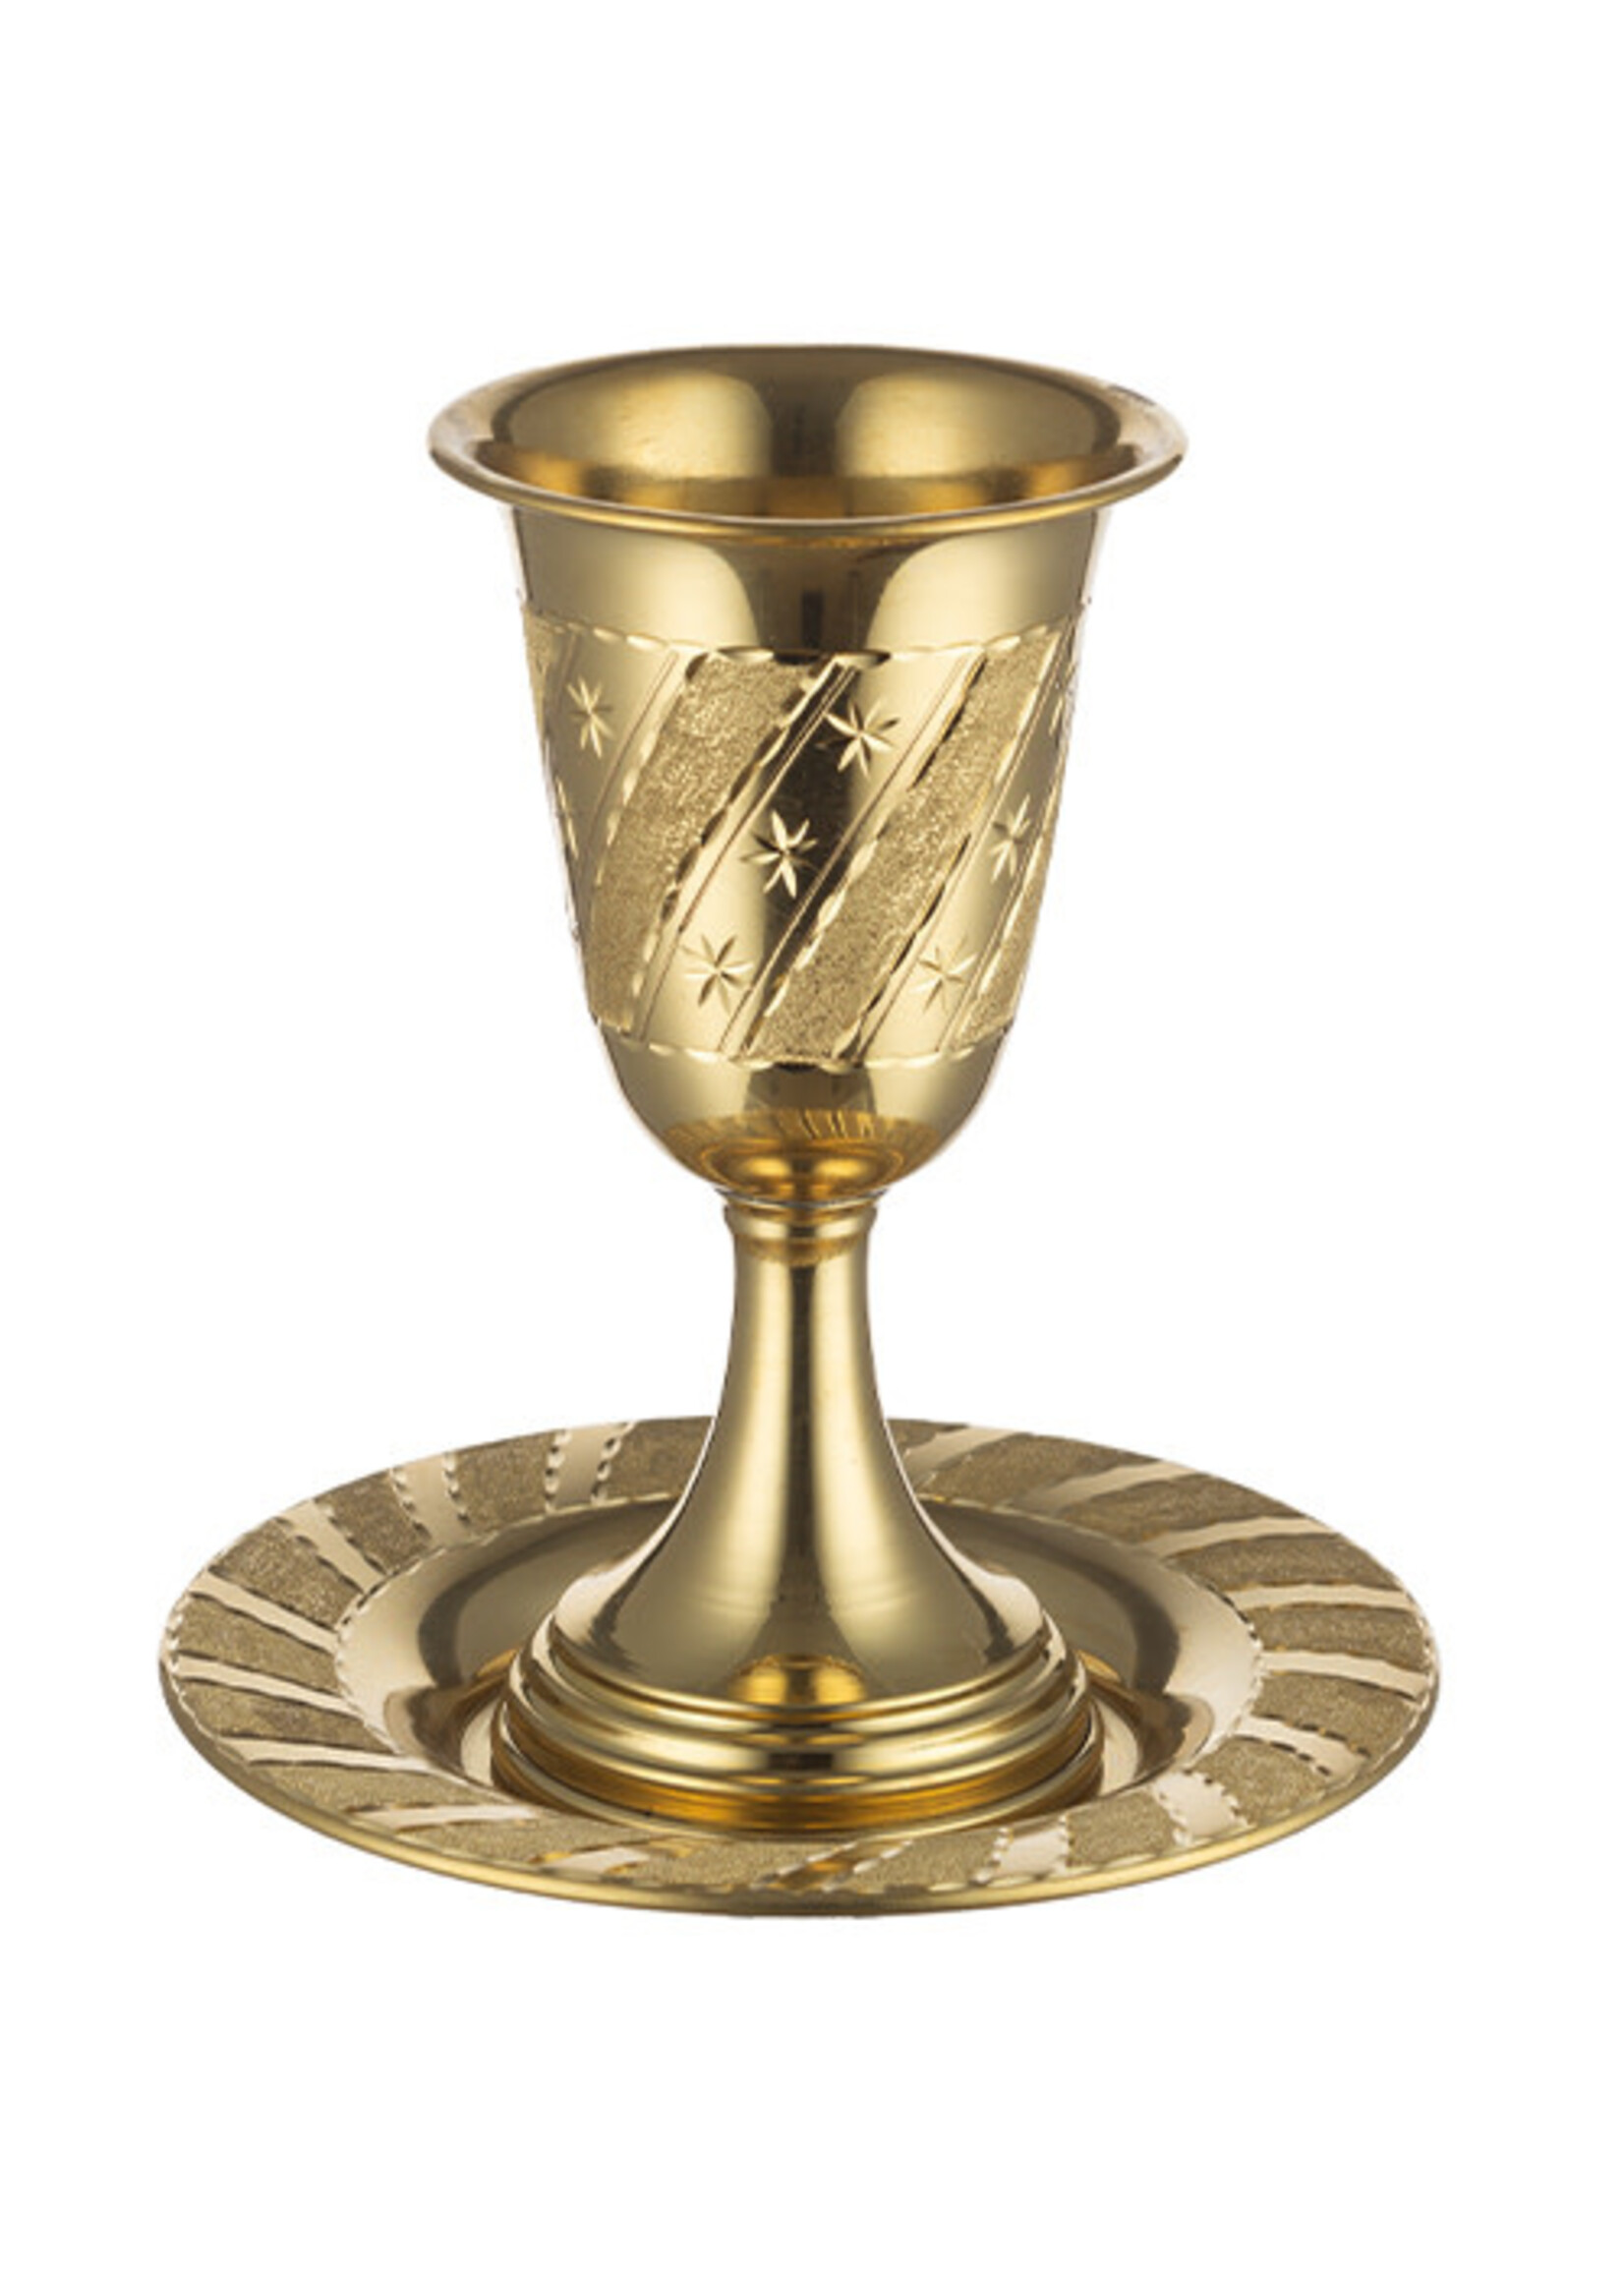 KIDDUSH CUP  WITH STEM AND PLATE SET-BRONZE